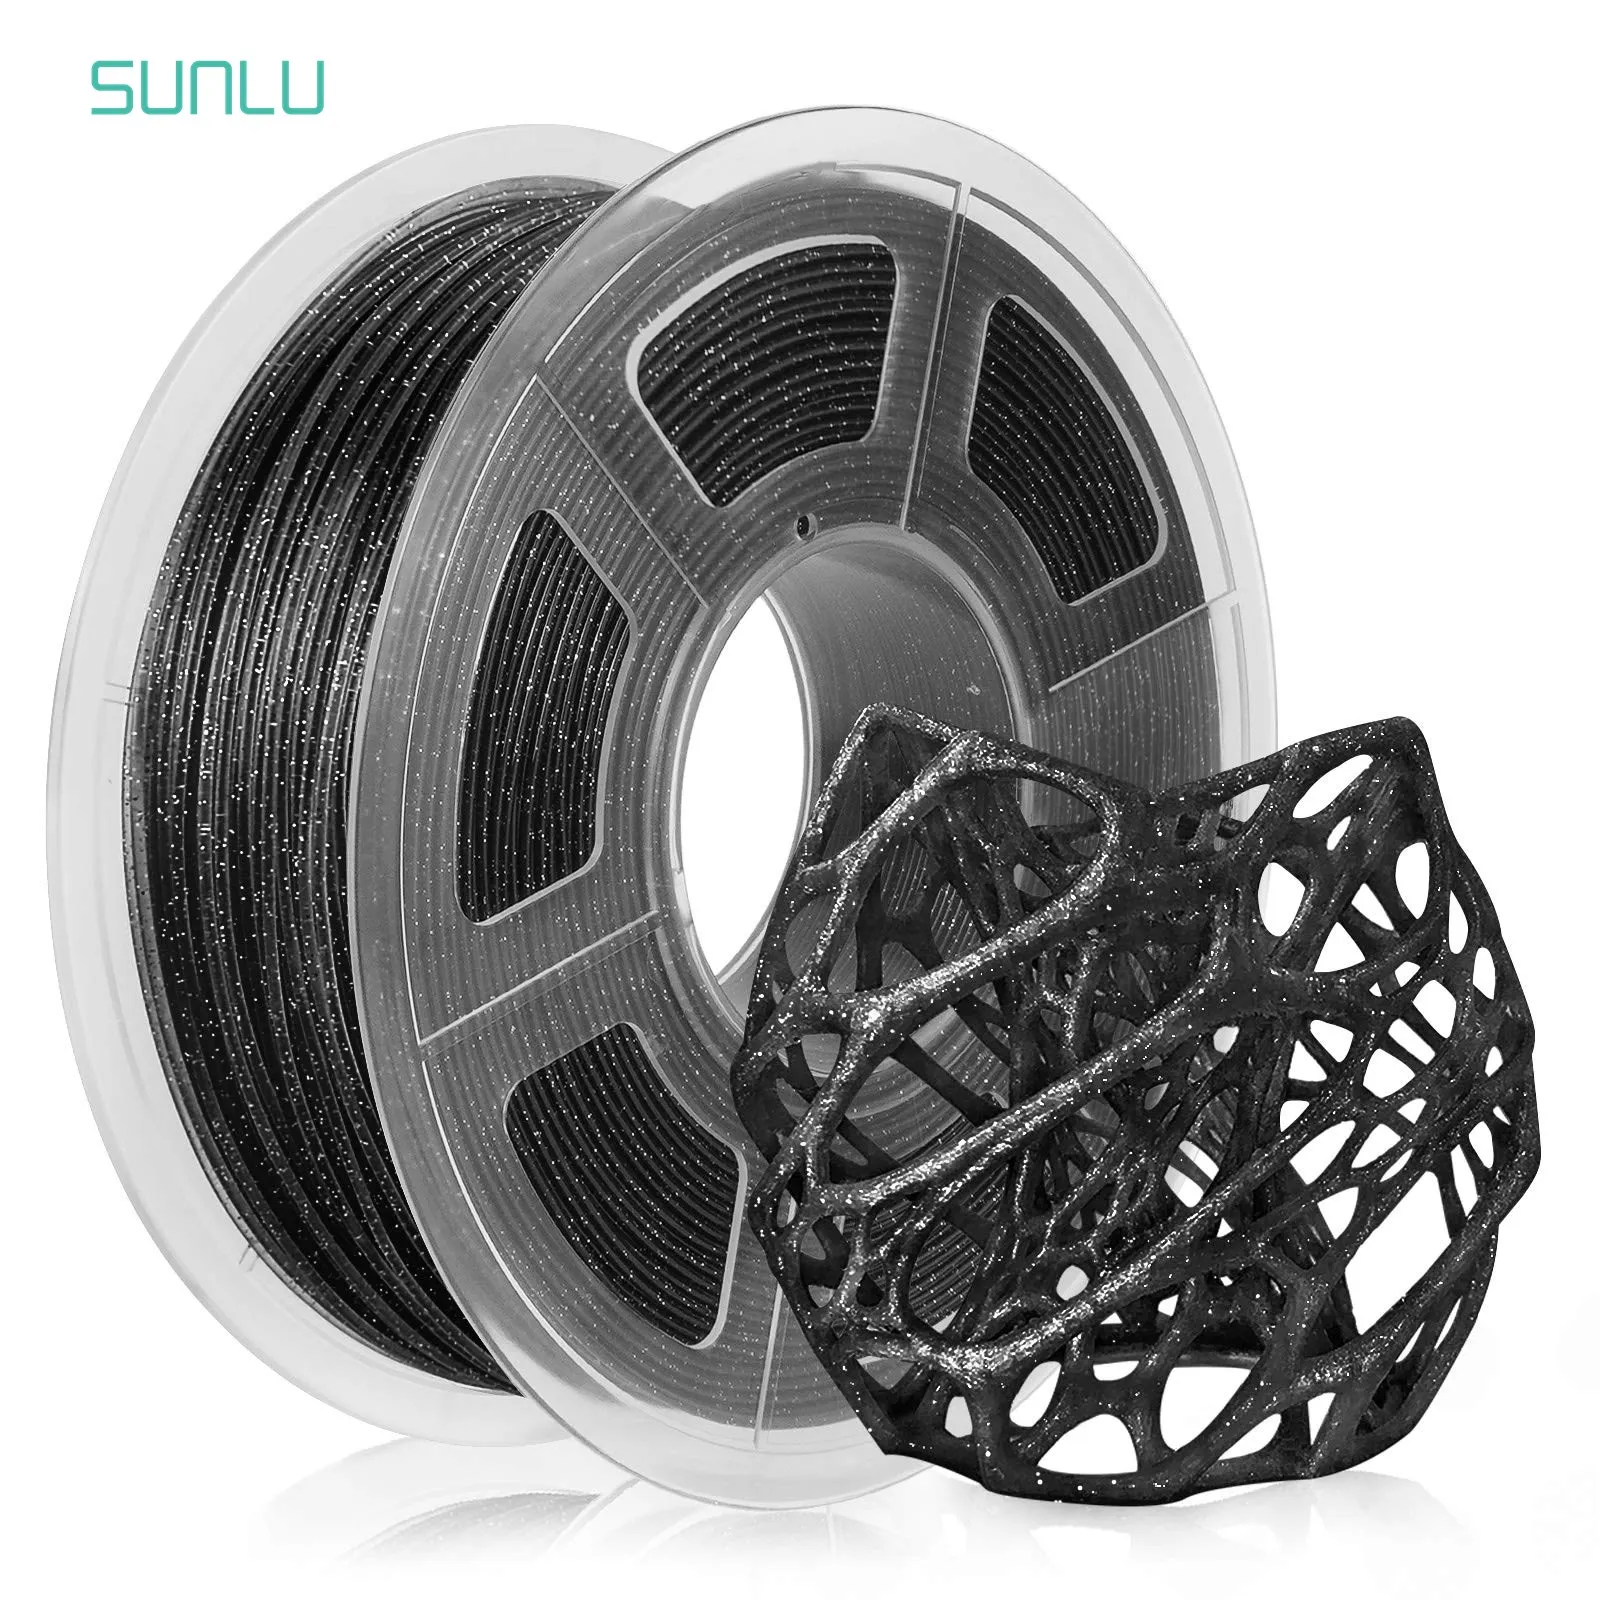 SUNLUTwinkling PLA 1.75mm filament 1kg/2.2lbs. Fit Most FDM Printer material for 3D Printers and 3D Pens with Vacuum packing 